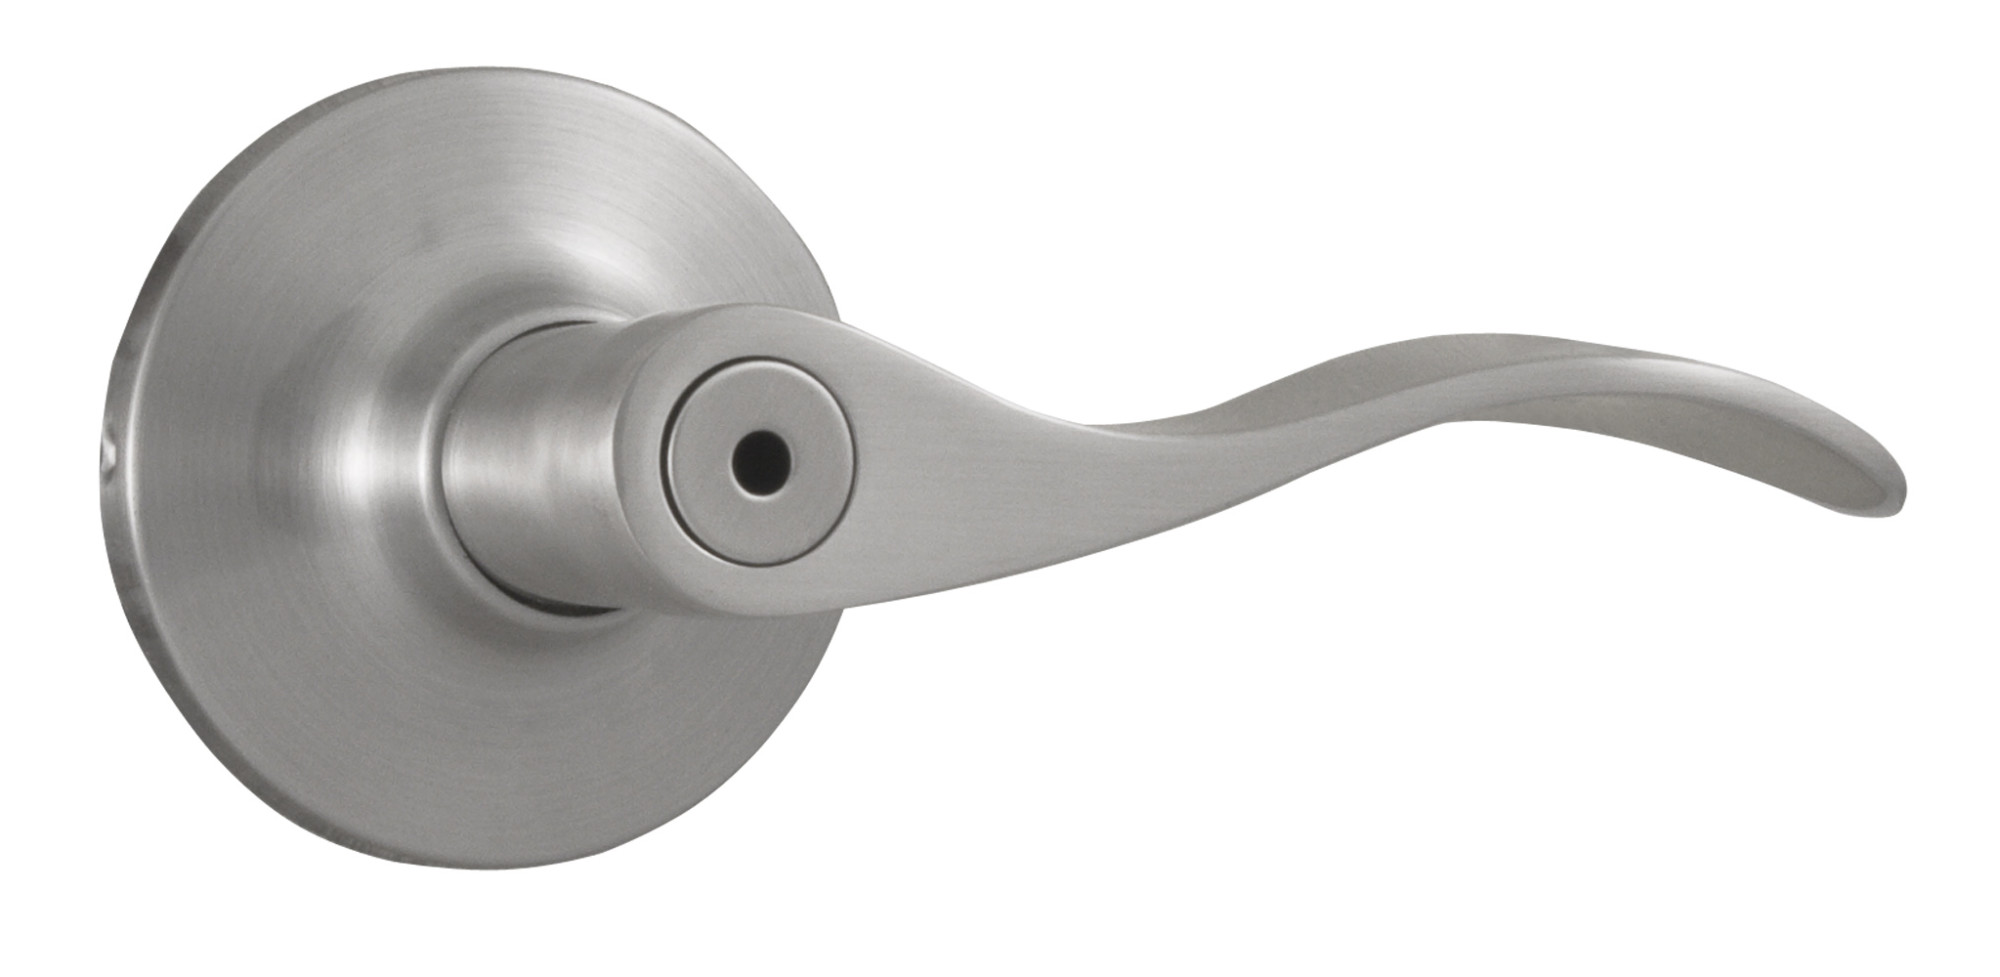 Weslock 00210xNxNFR20 New Haven Privacy Lock with Adjustable Latch and Full Lip Strike Satin Nickel Finish - image 1 of 2